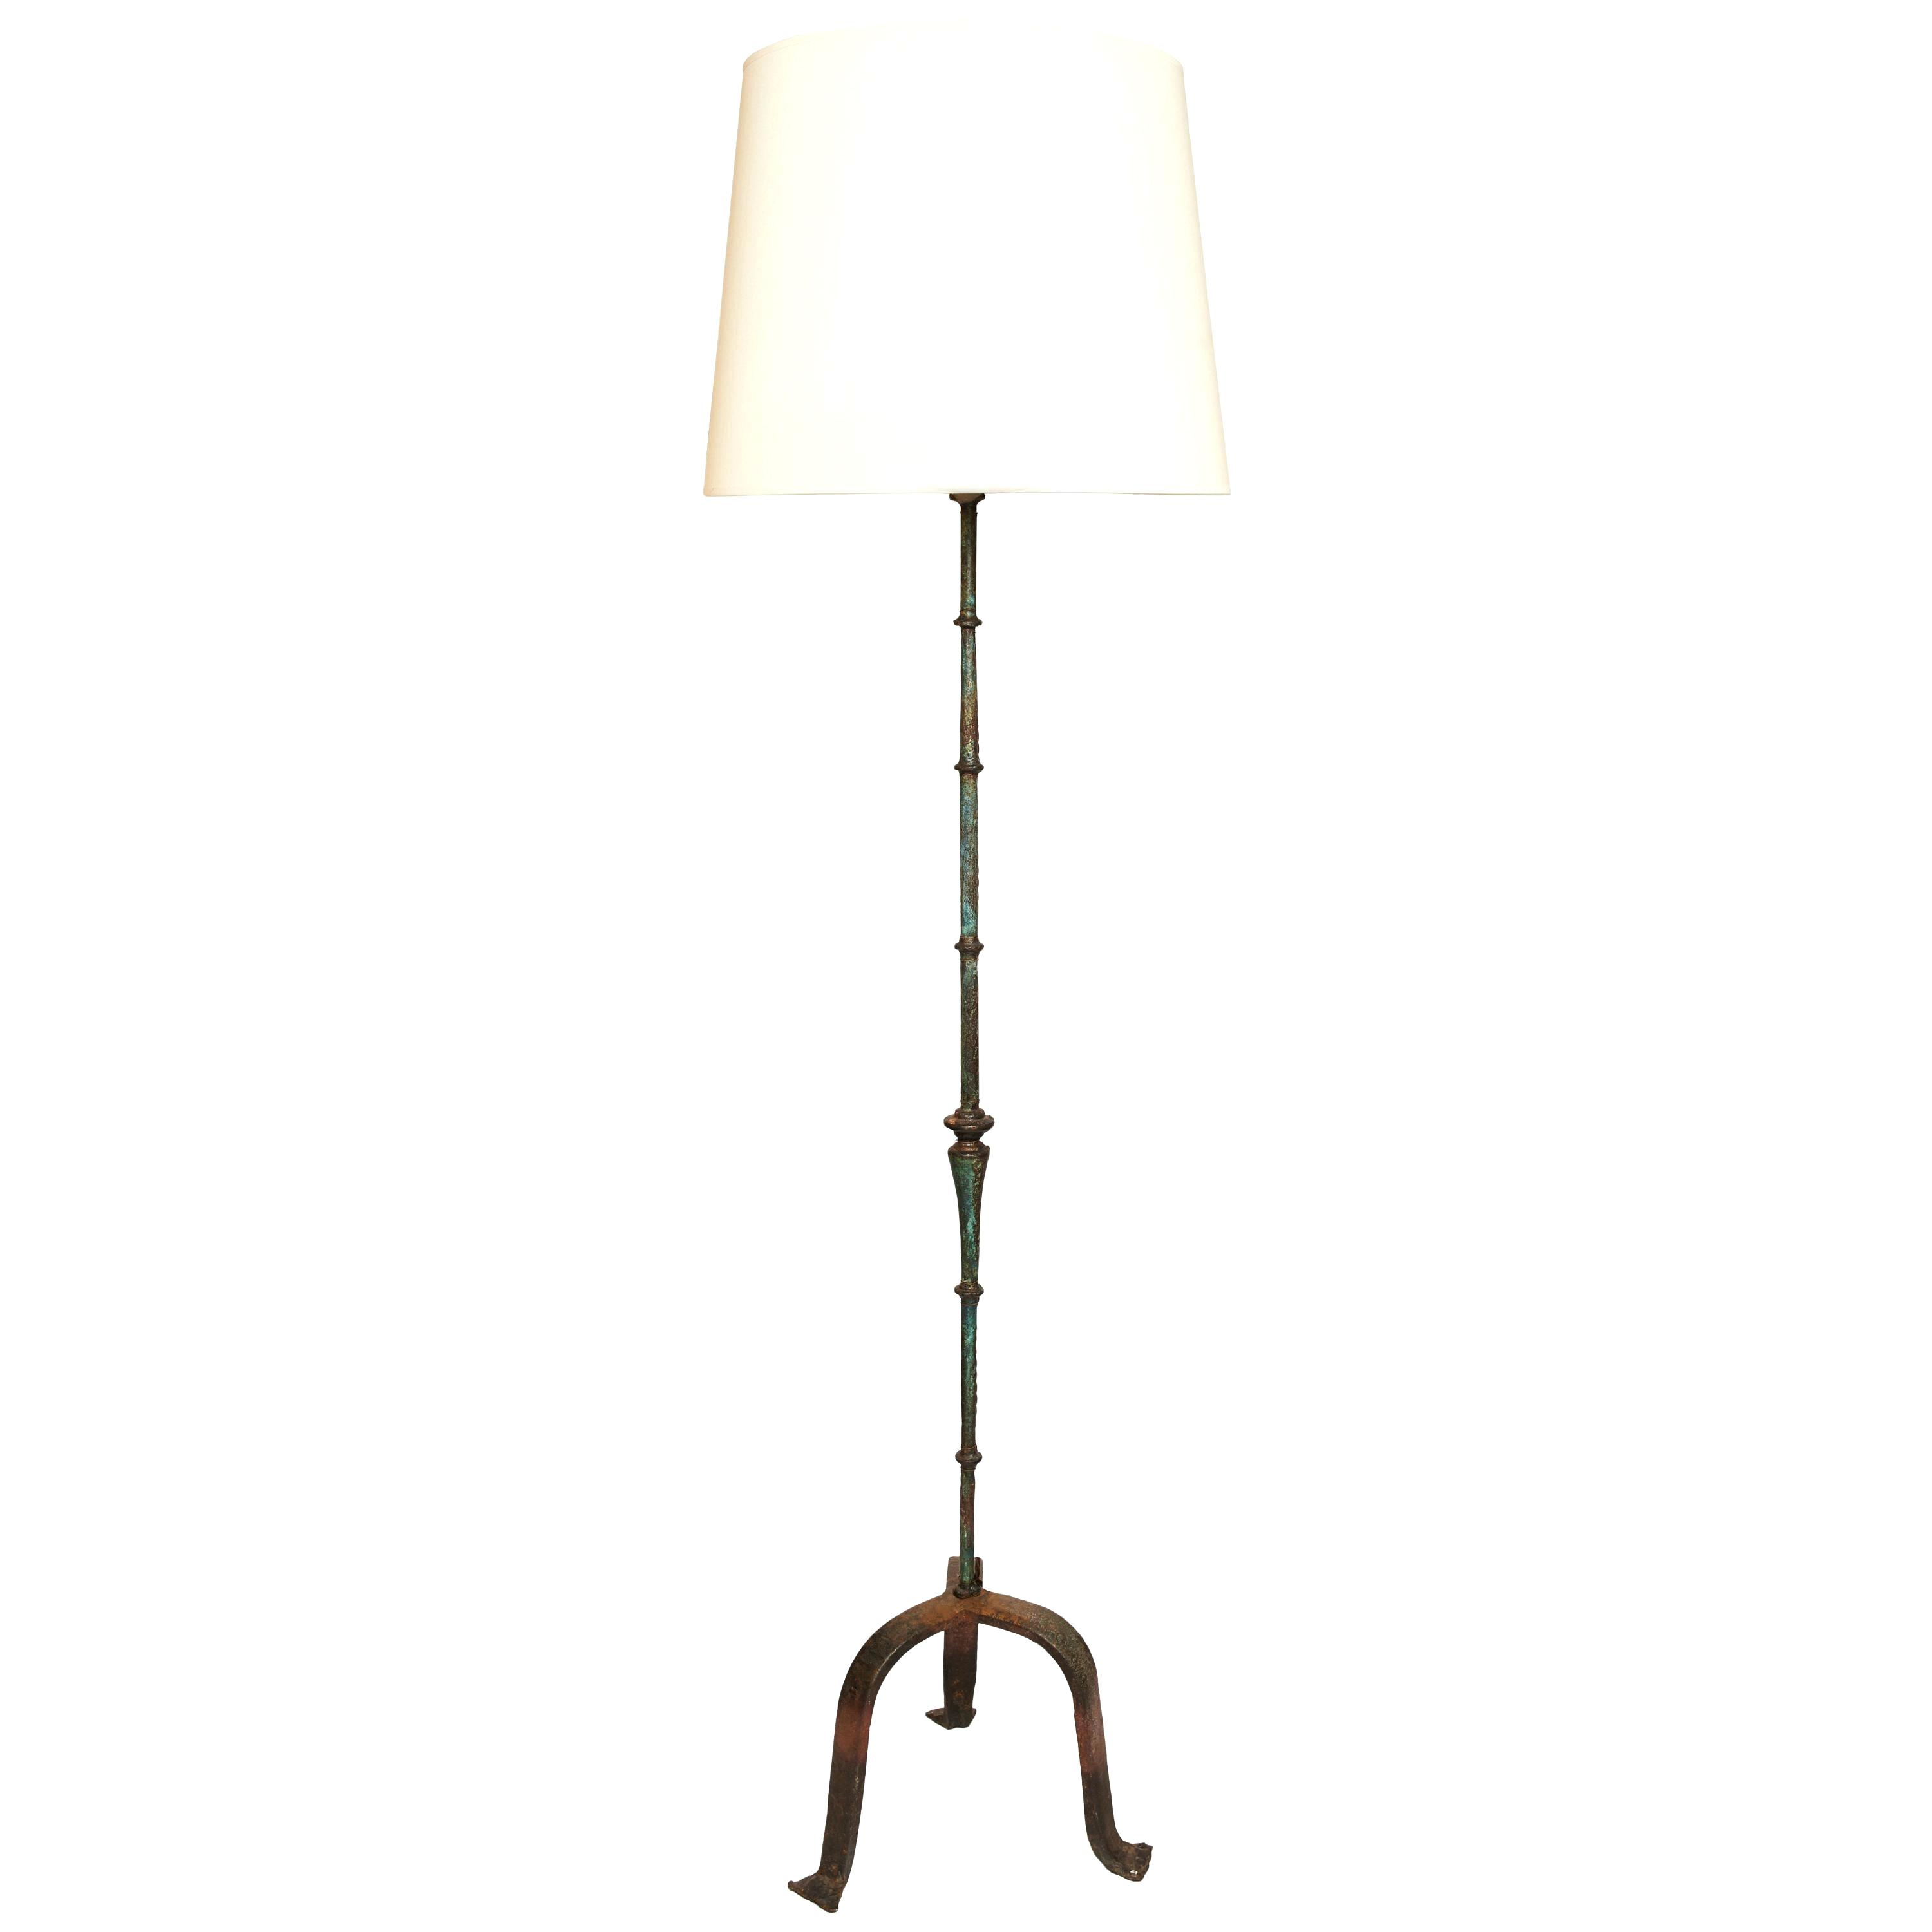 Wrought Iron Floor Lamps A Wrought Iron Floor Lamp Ca throughout sizing 3000 X 3000